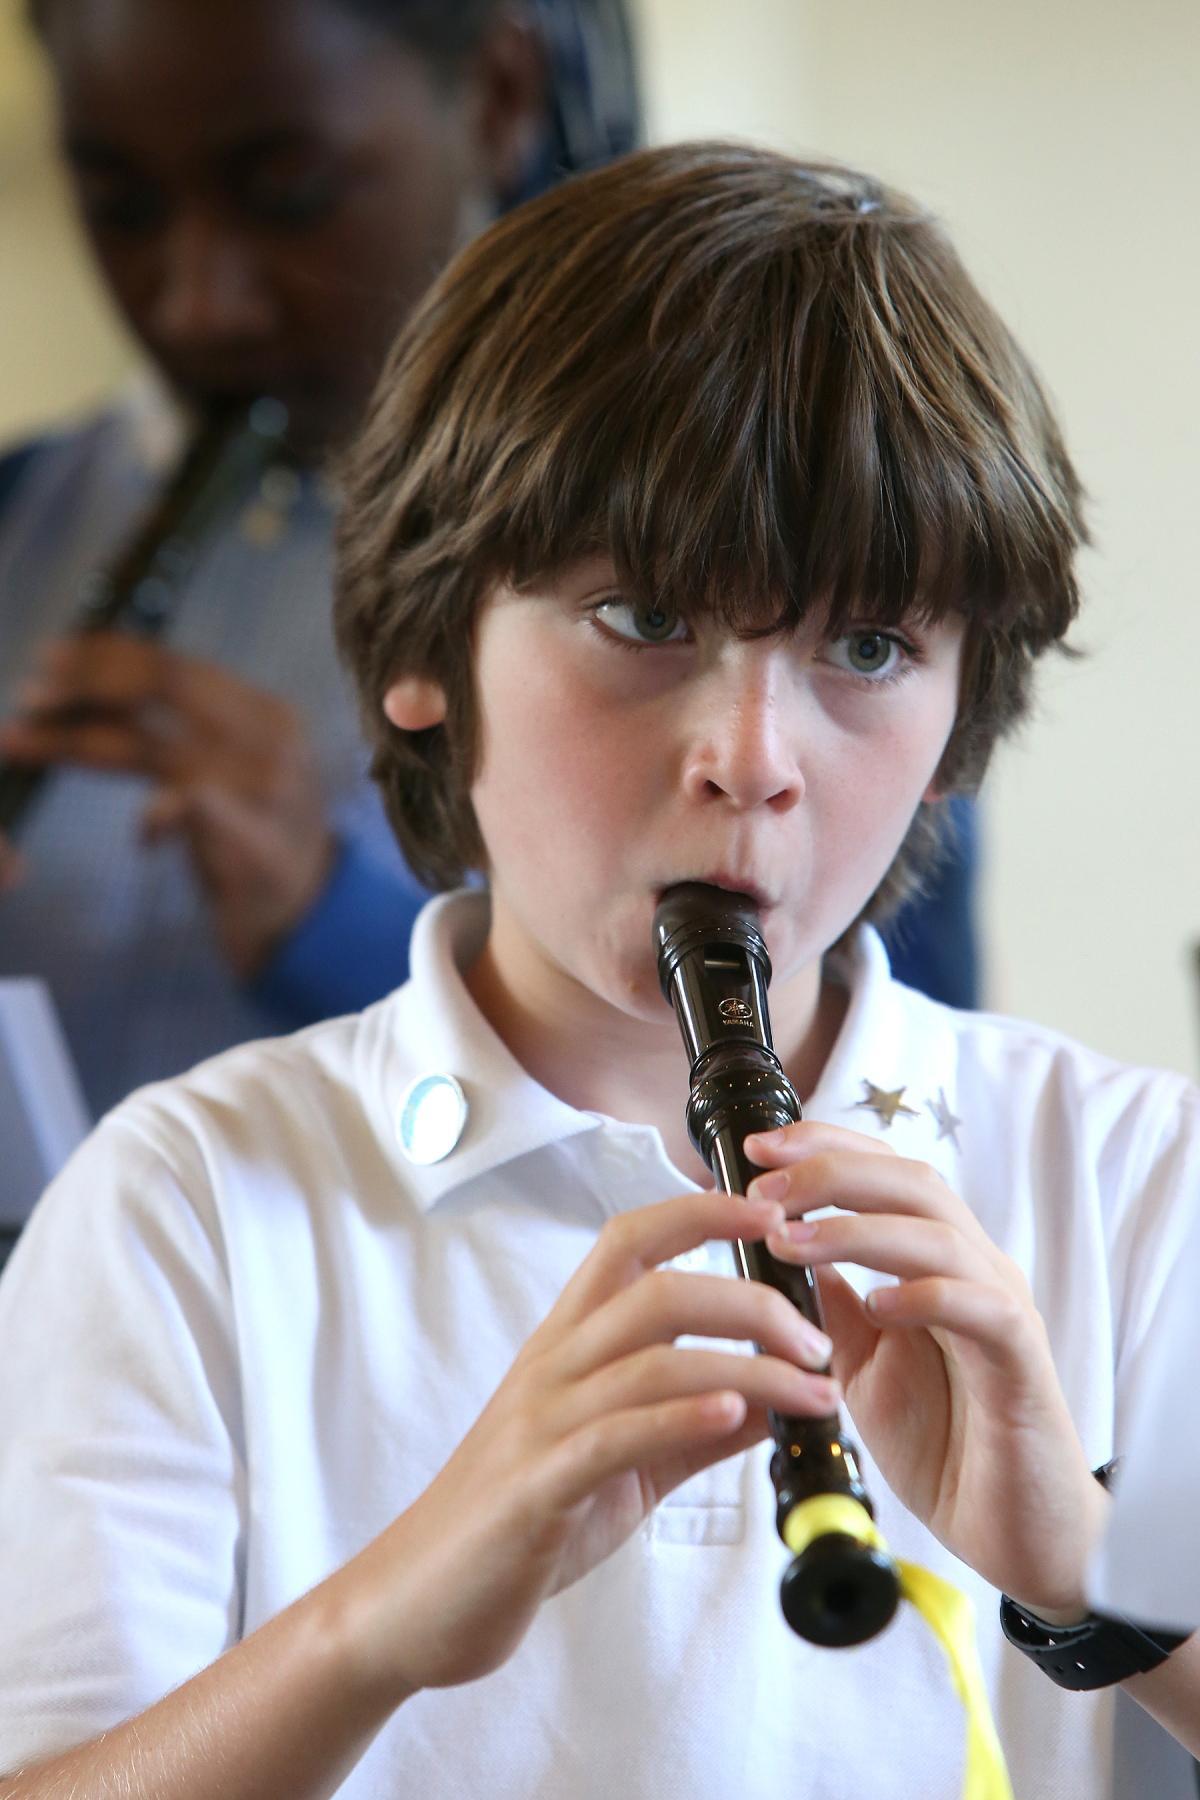 Children rehearse for The Redbridge Schools Recorder Festival involving schools from across Wanstead and Woodford at St Mary's church, High Road, South Woodford. (19/5/2015) EL83885